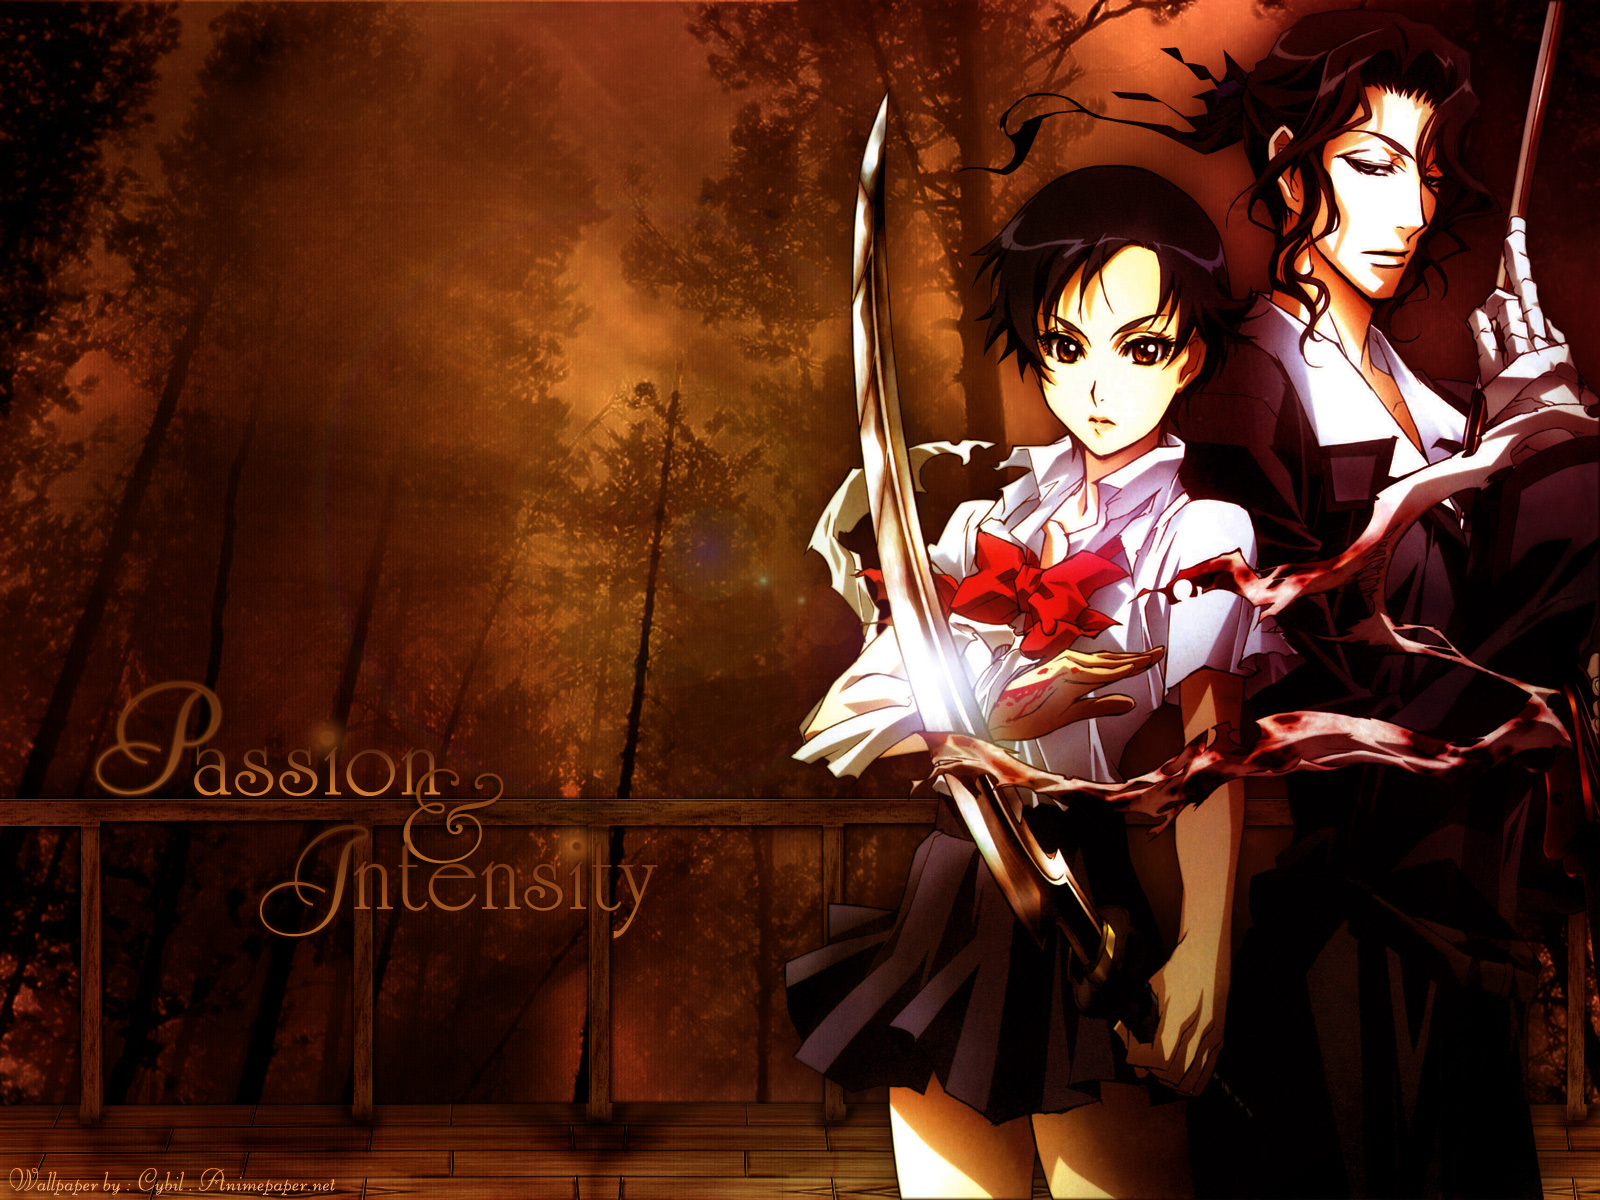 Anime Blood+ HD Wallpaper | Background Image